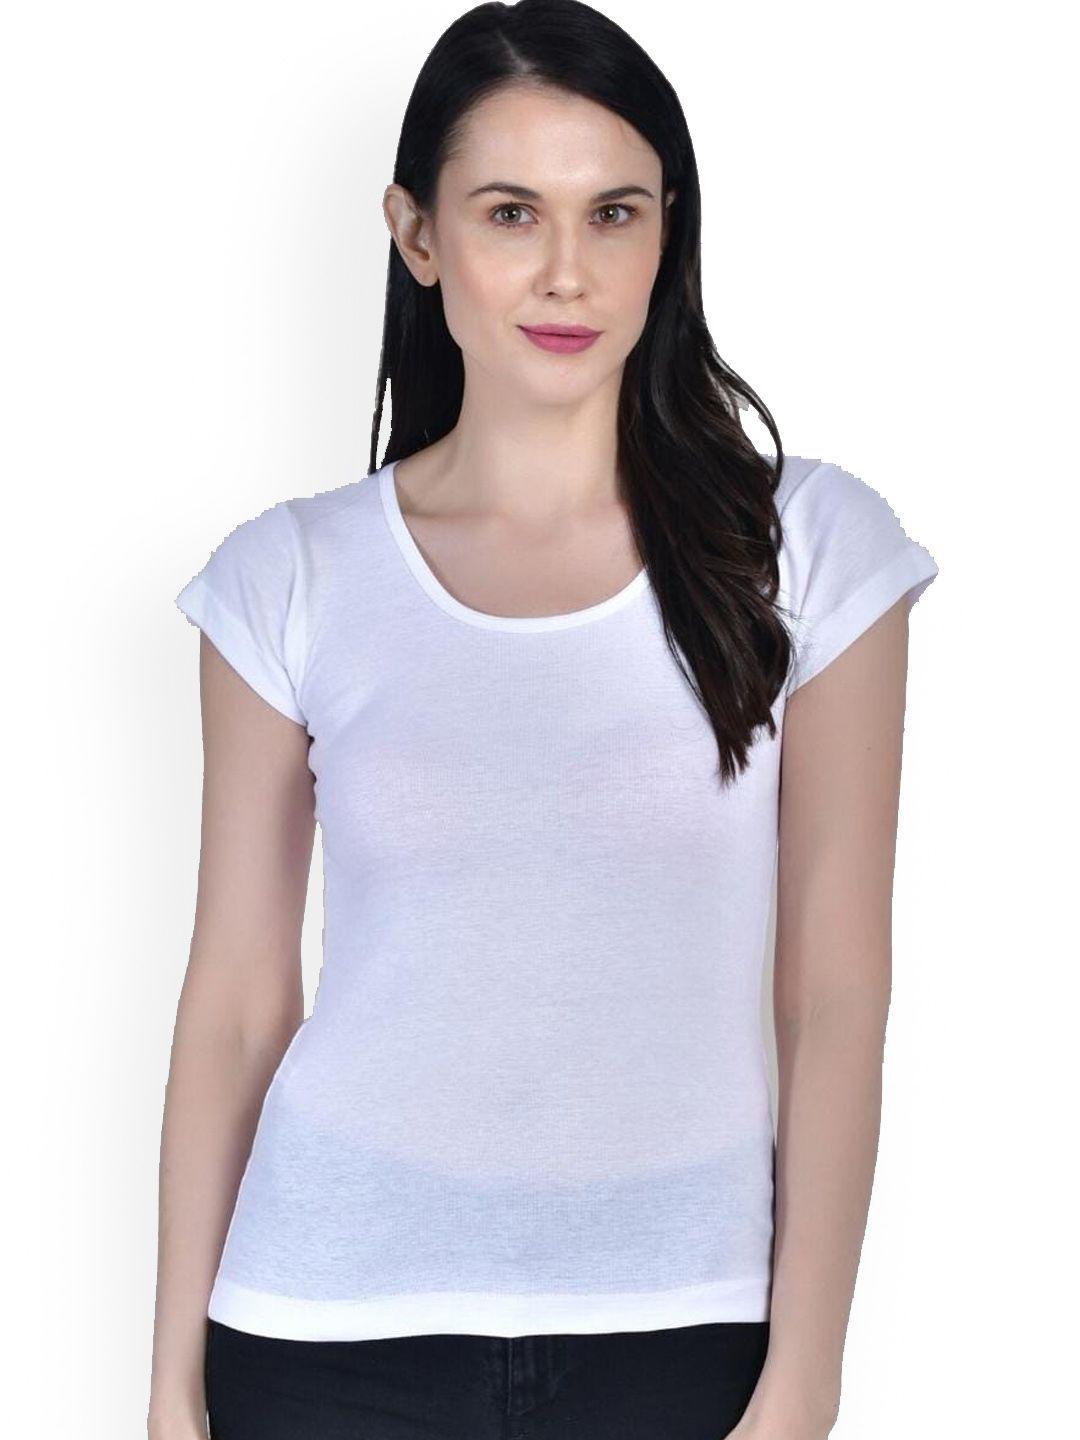 aimly cap sleeves non padded cotton camisole